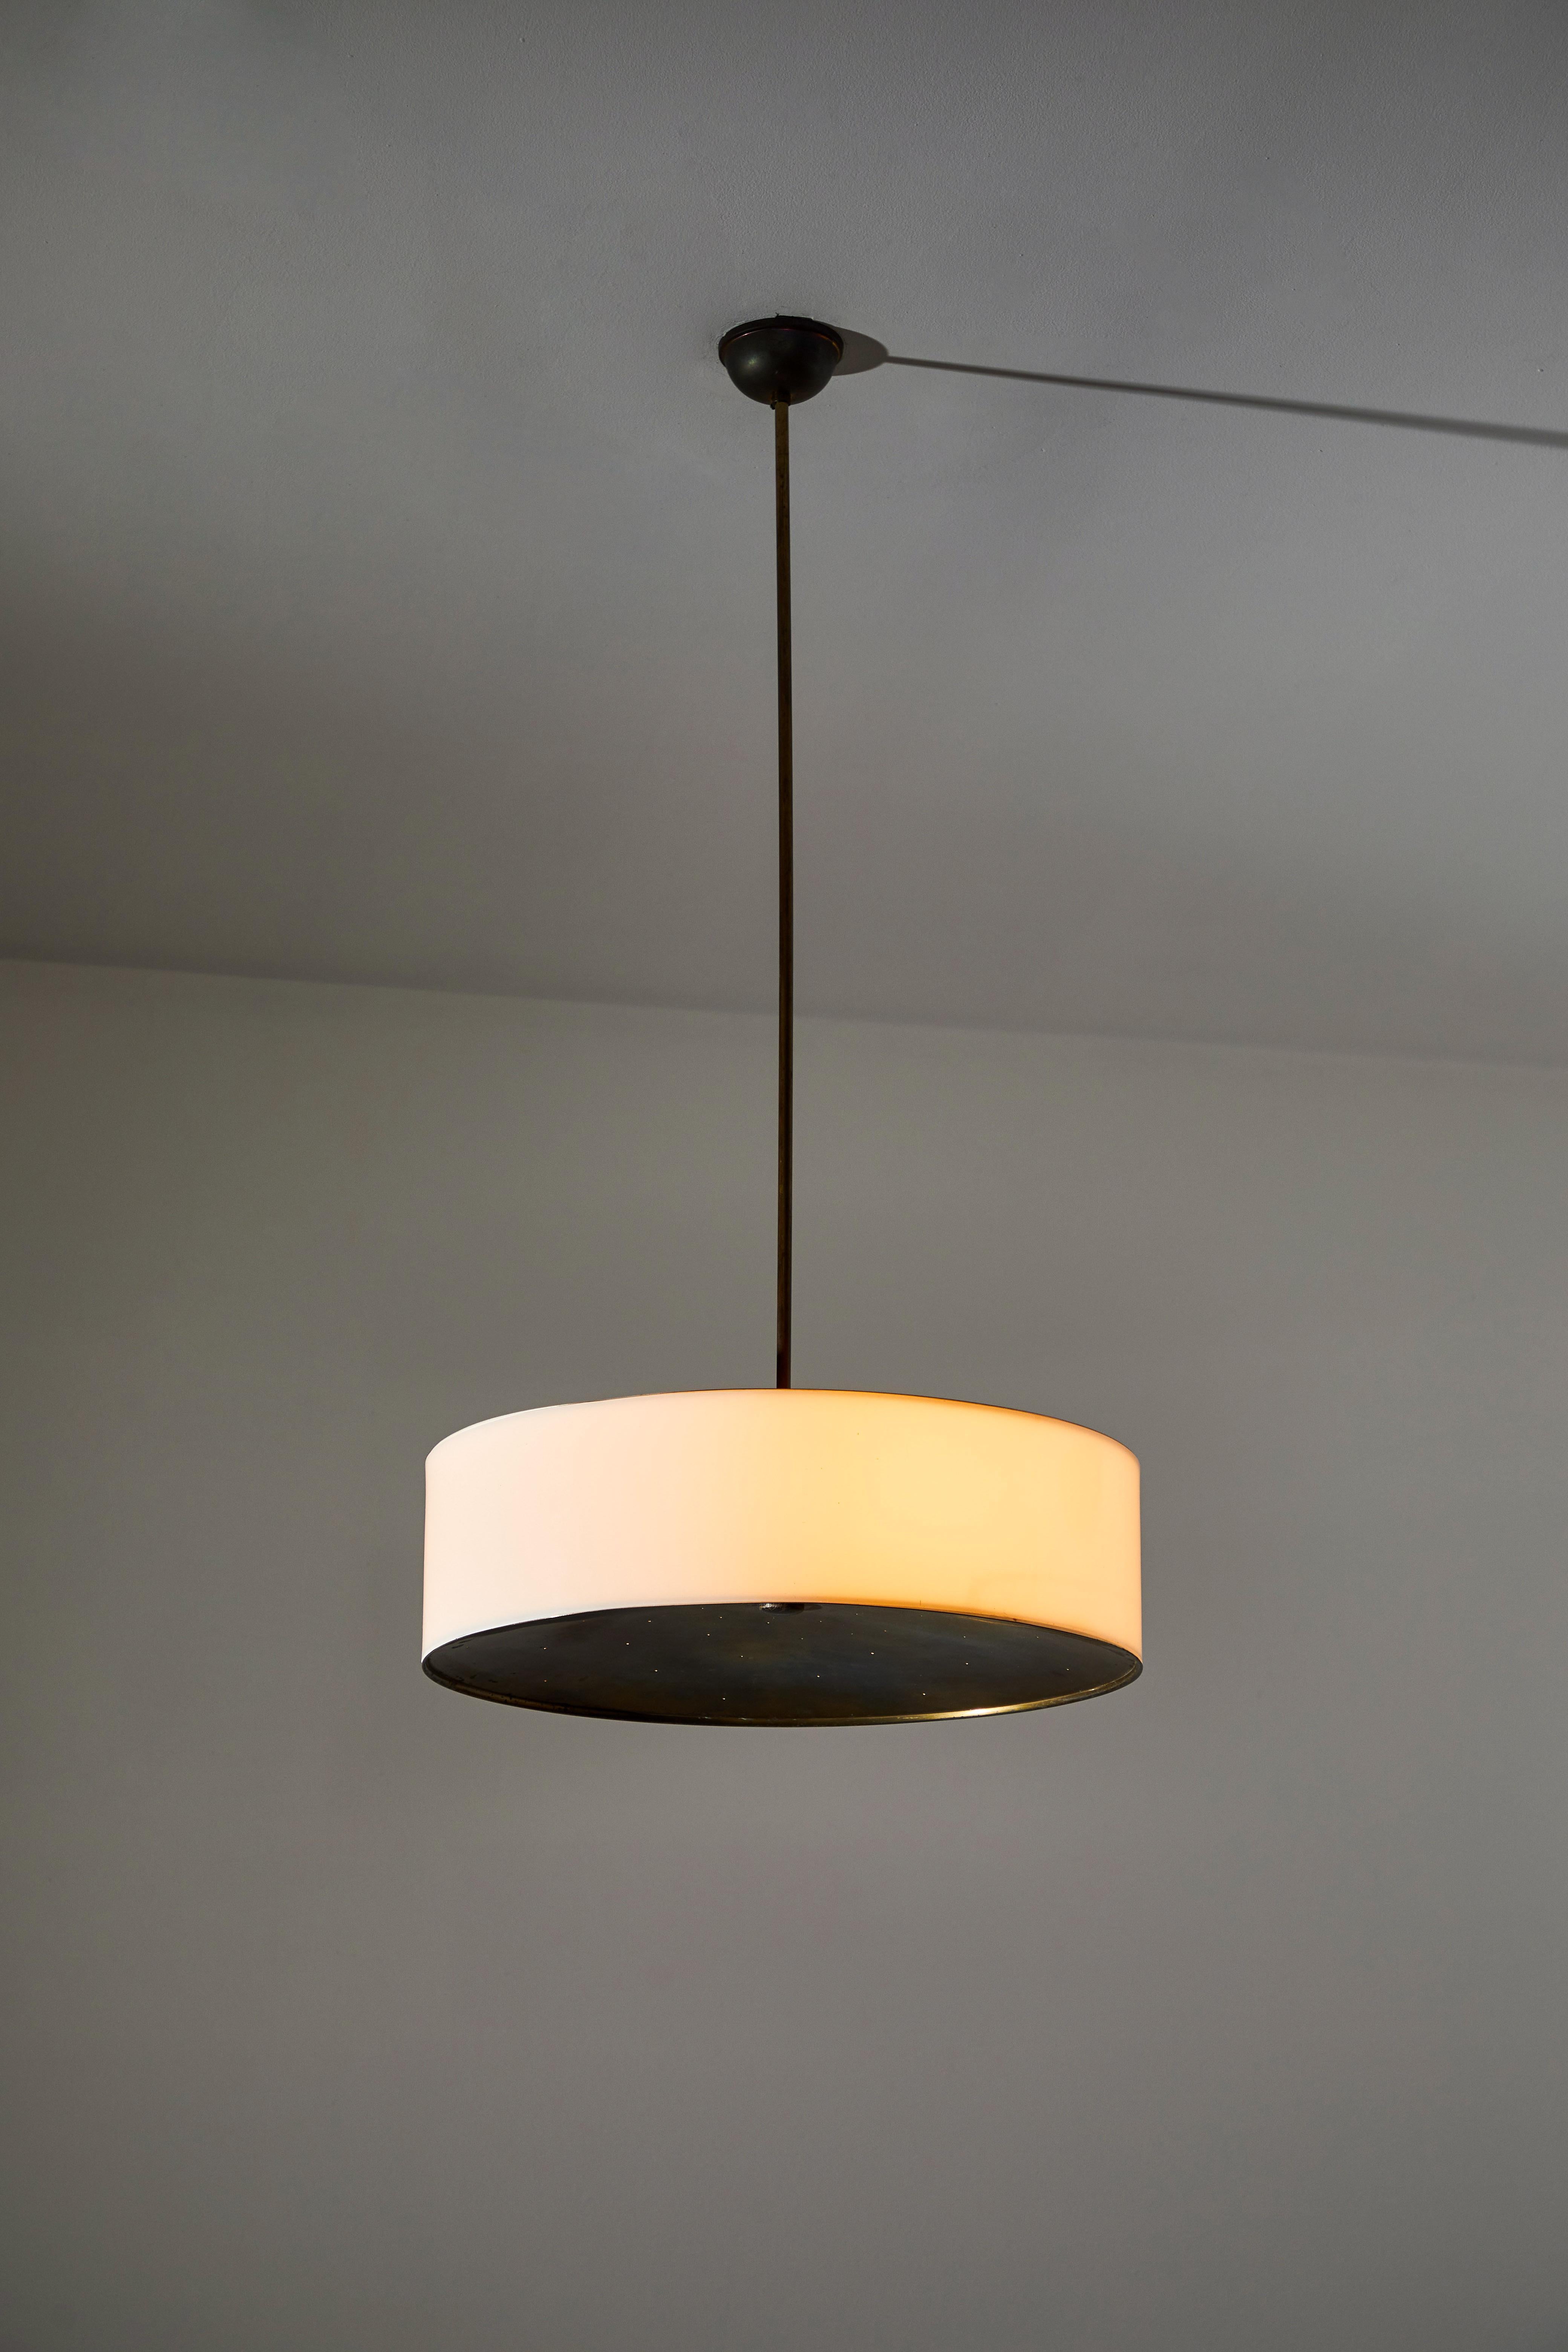 Italian pendant by Bucci. Designed and manufactured in Italy, circa 1950s. Acrylic, perforated brass. Original canopy. Rewired for U.S. Standards. We recommend three E27 60w maximum bulbs. Bulbs provided as a one time courtesy.